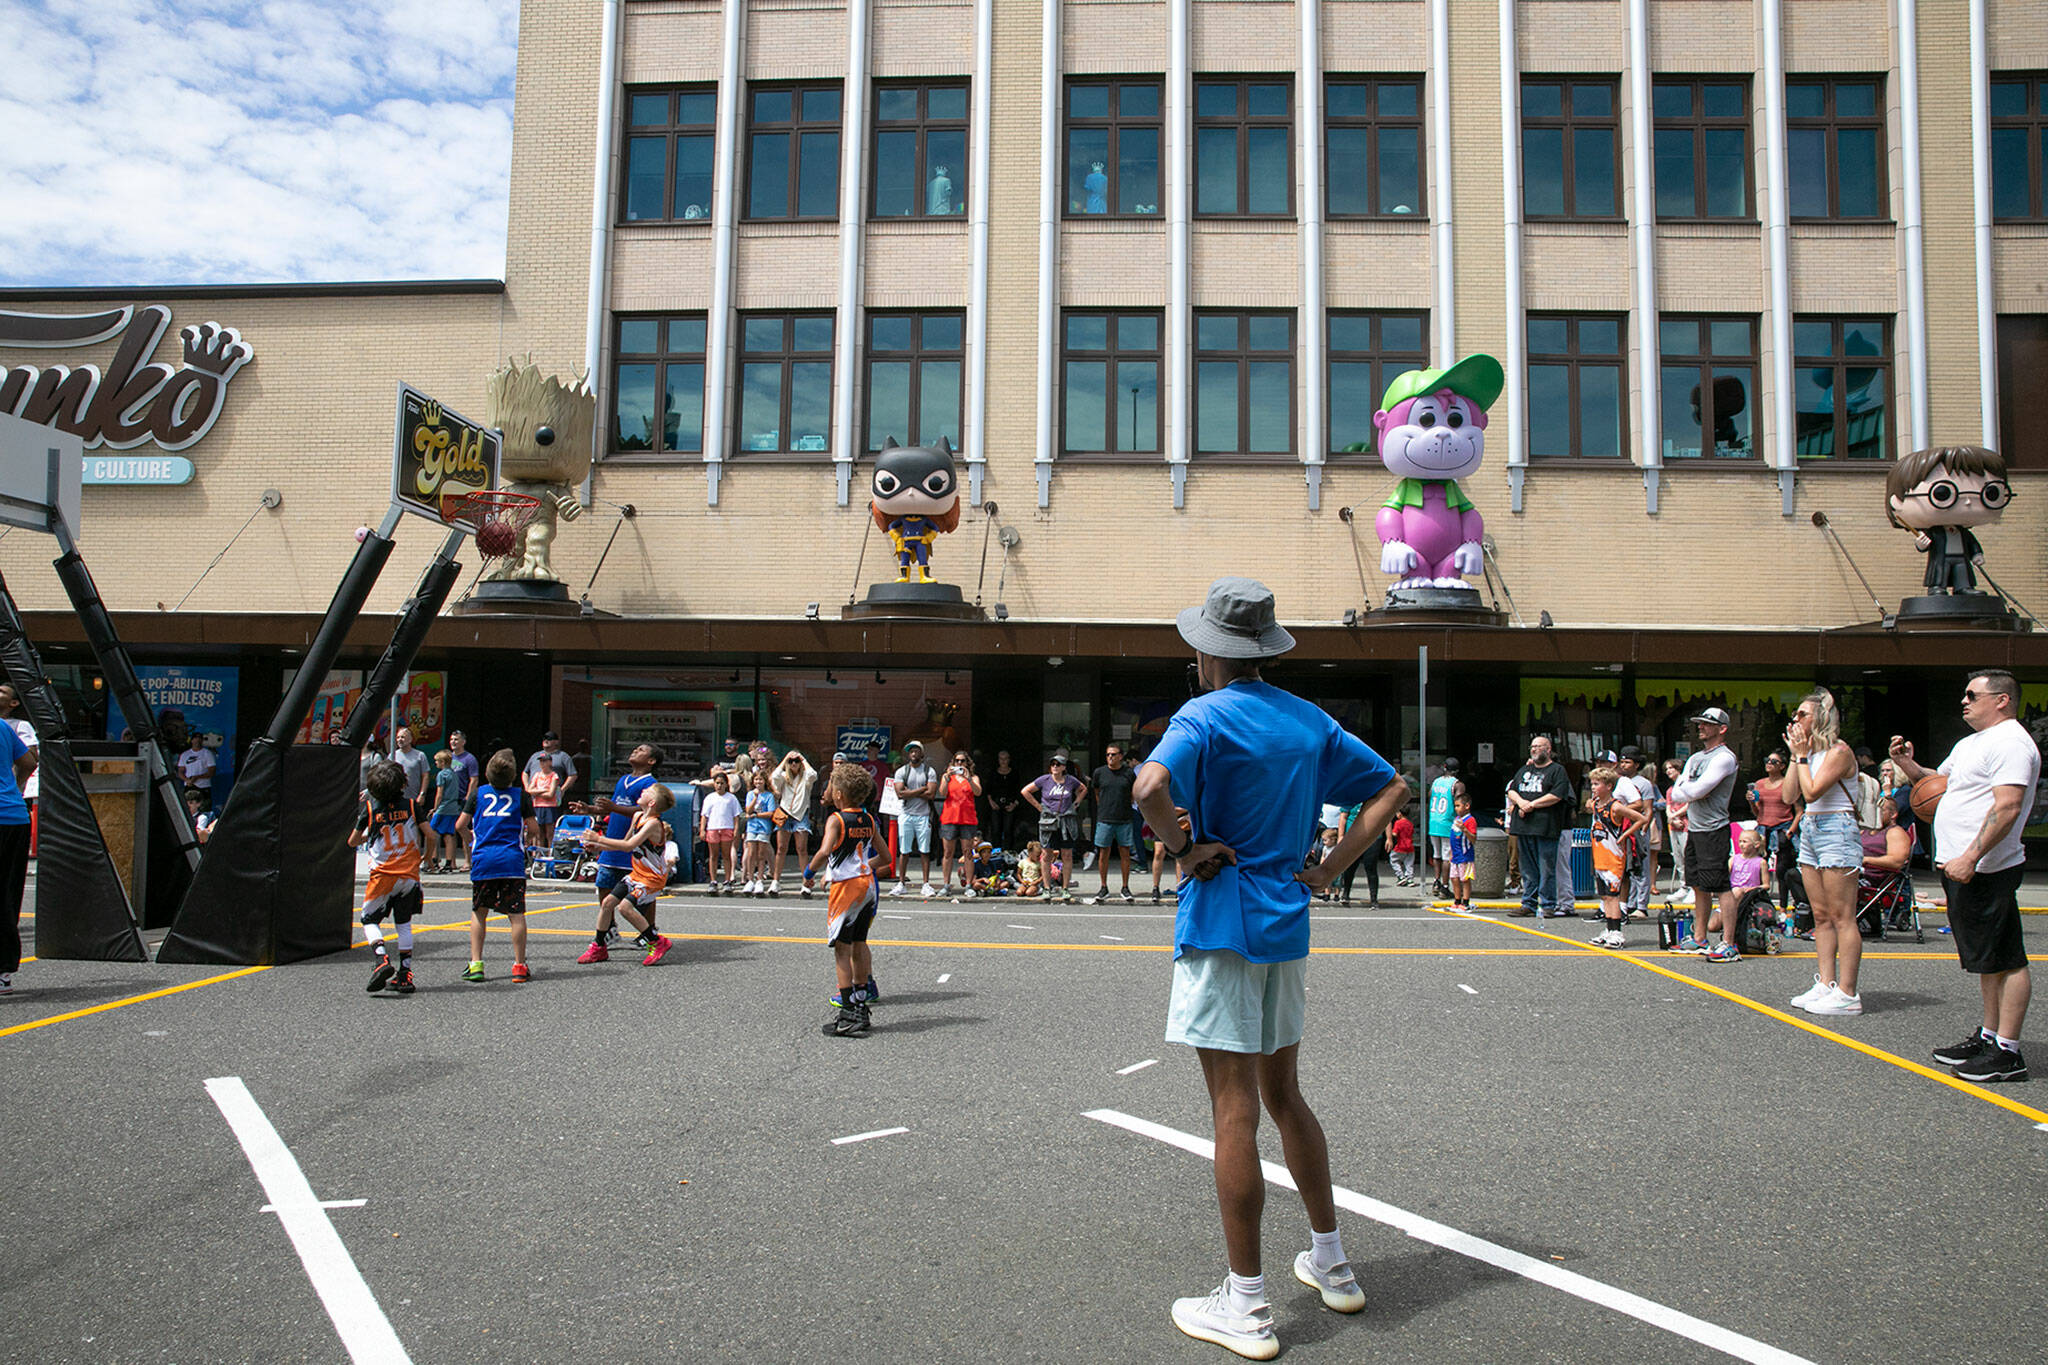 Young children play basketball in front of the Funko store Saturday during Everett 3on3 in downtown Everett. (Ryan Berry / The Herald)